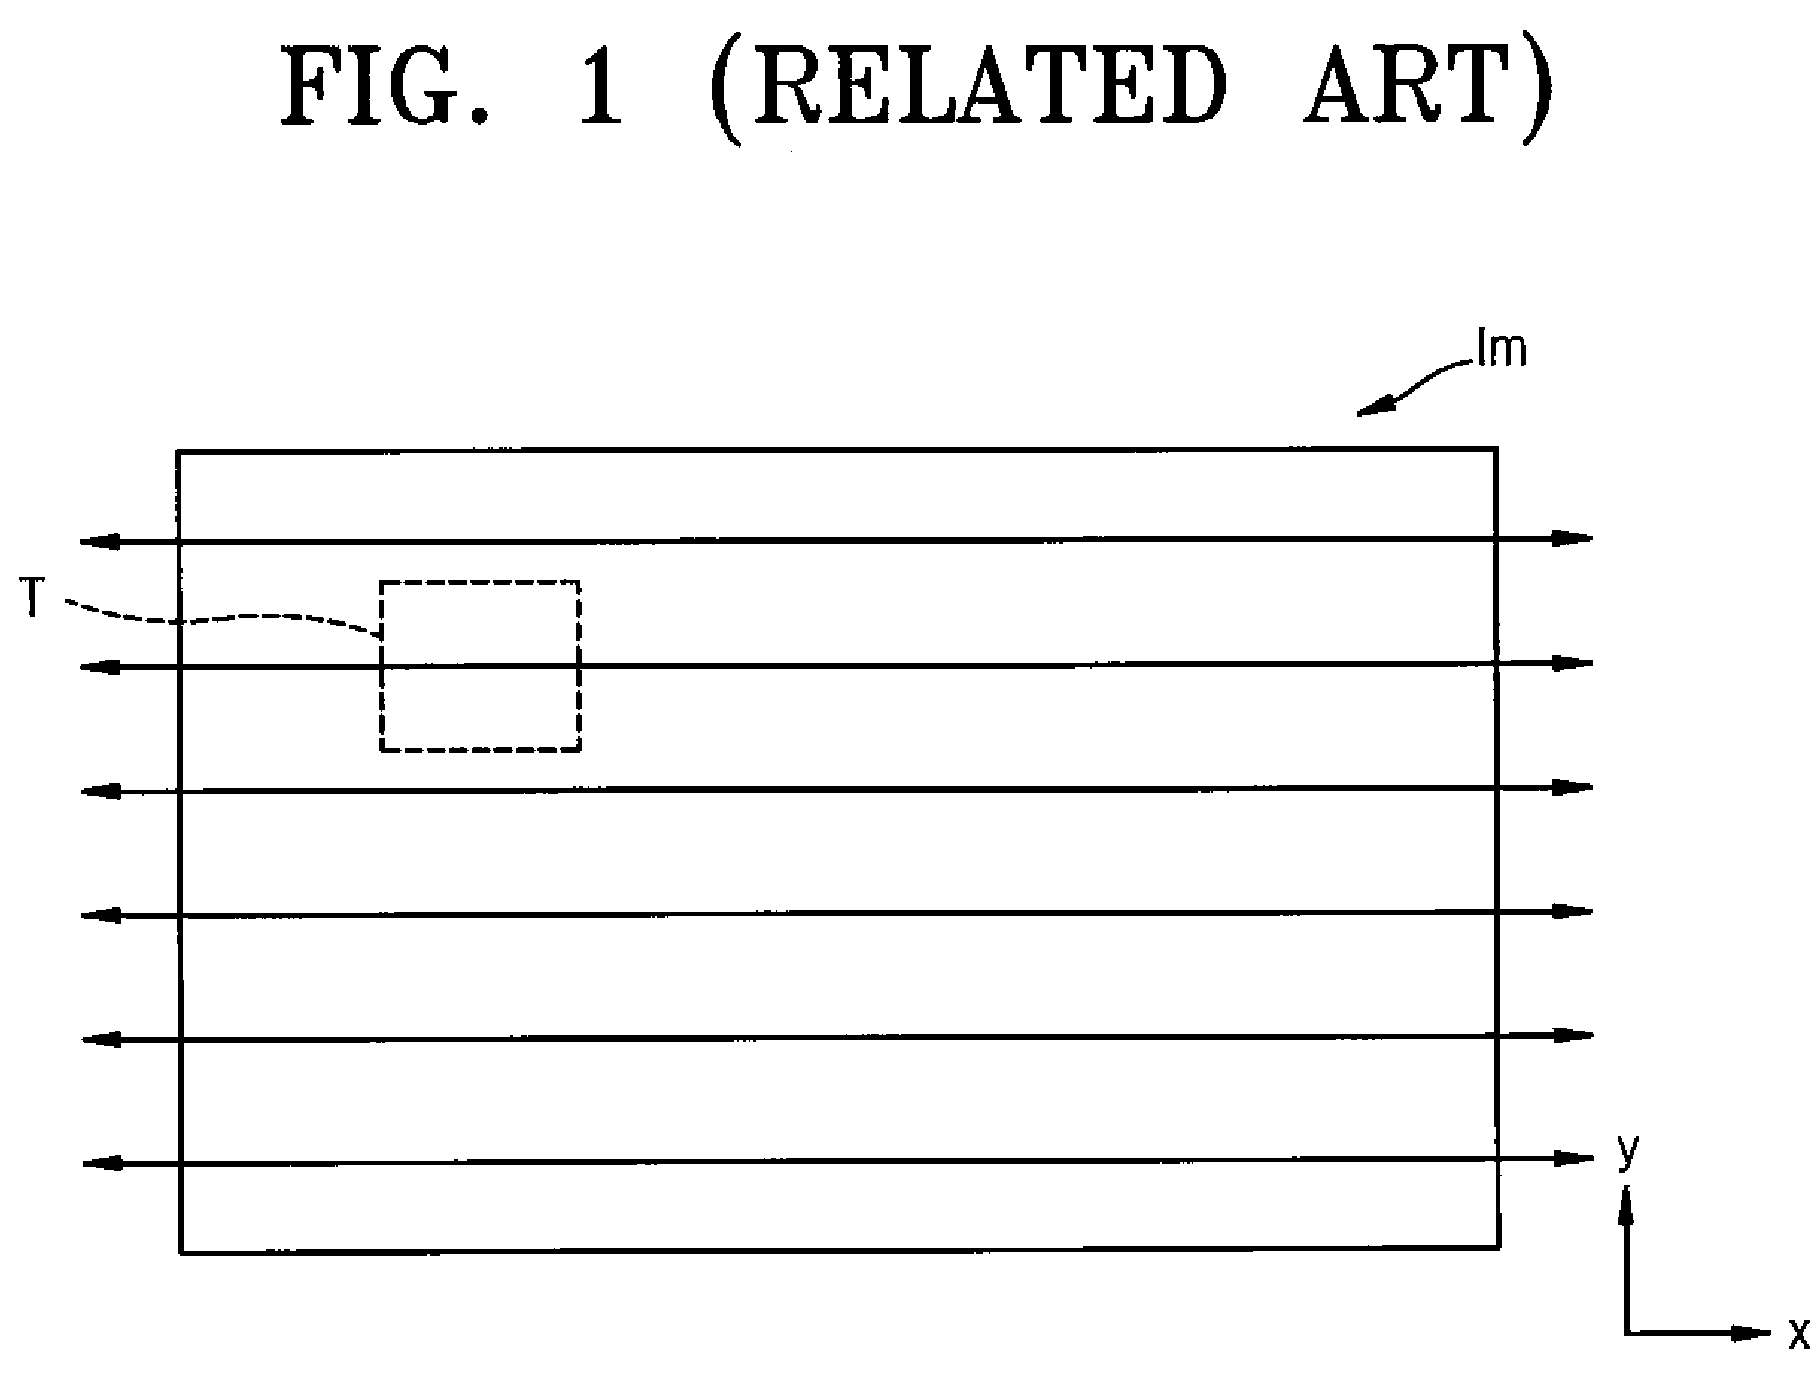 Image processing apparatus and method for tracking a location of a target subject